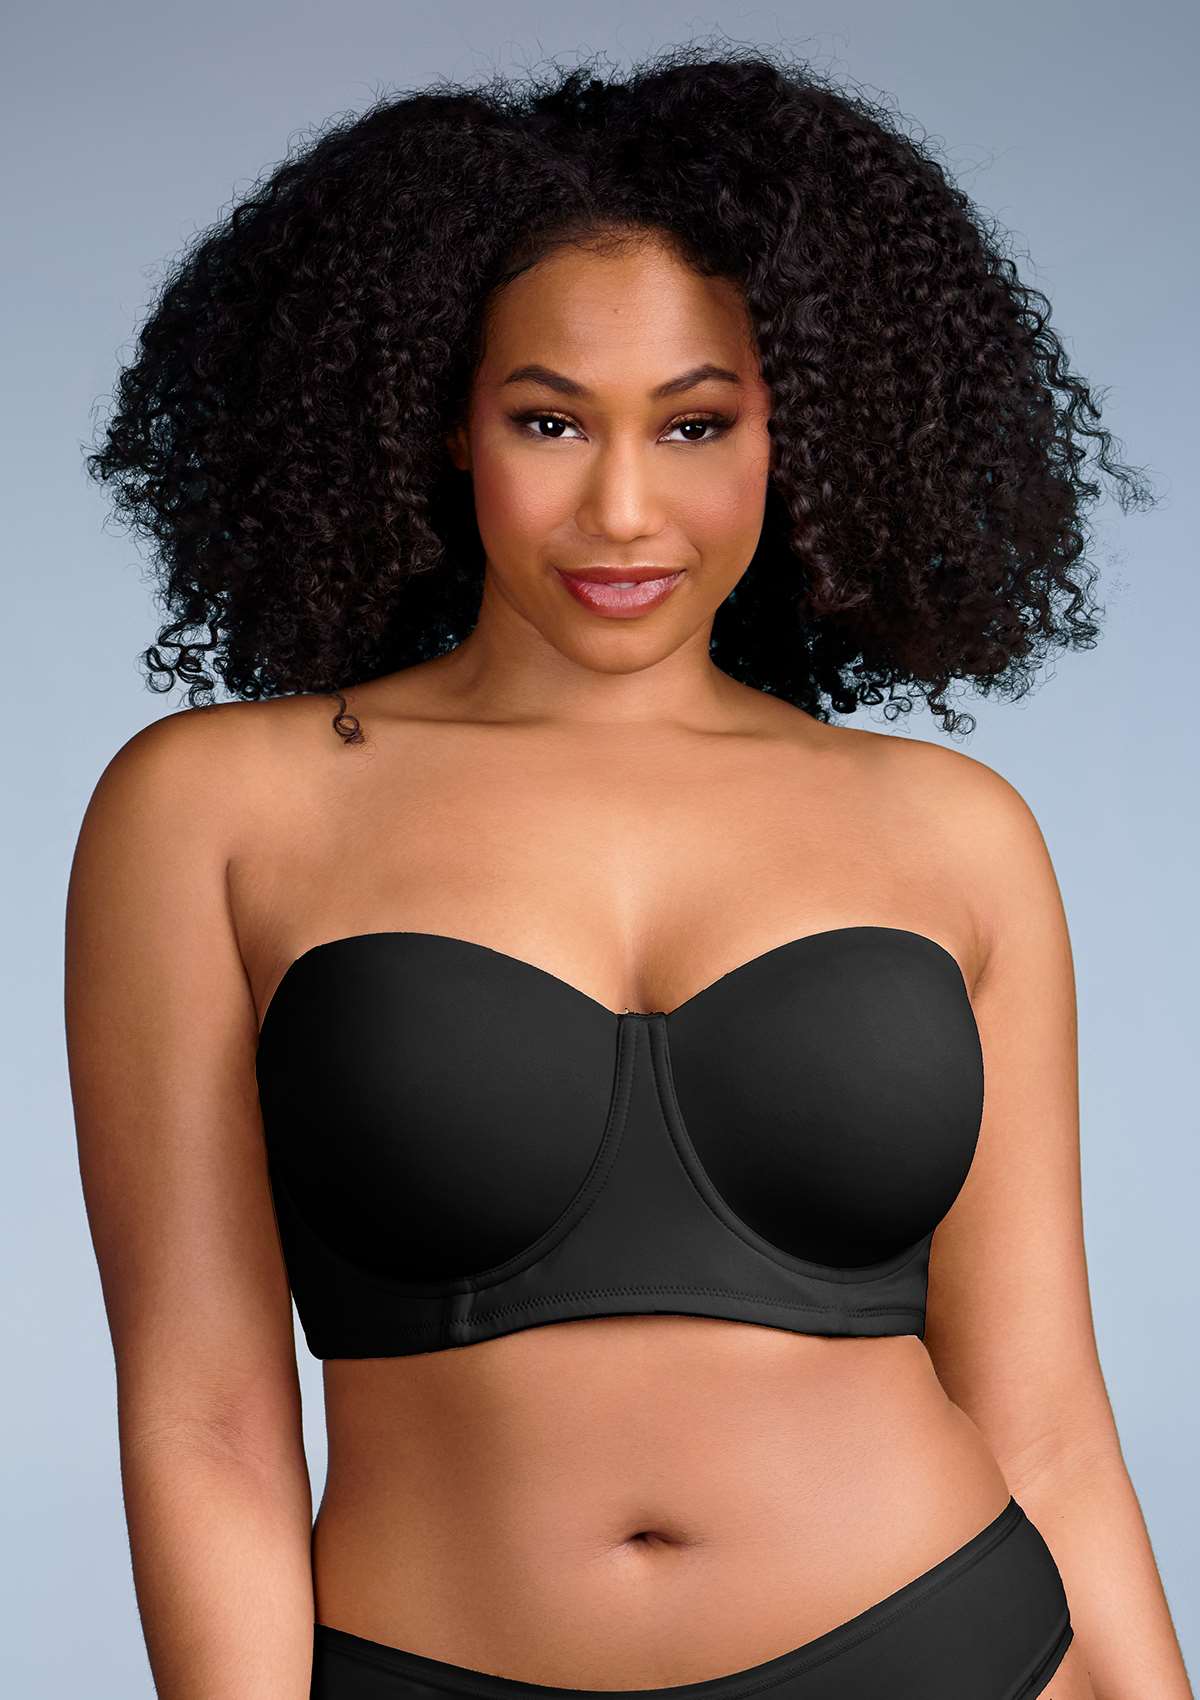 HSIA Margaret Molded Convertible Multiway Classic Strapless Bra - Black / 44 / C